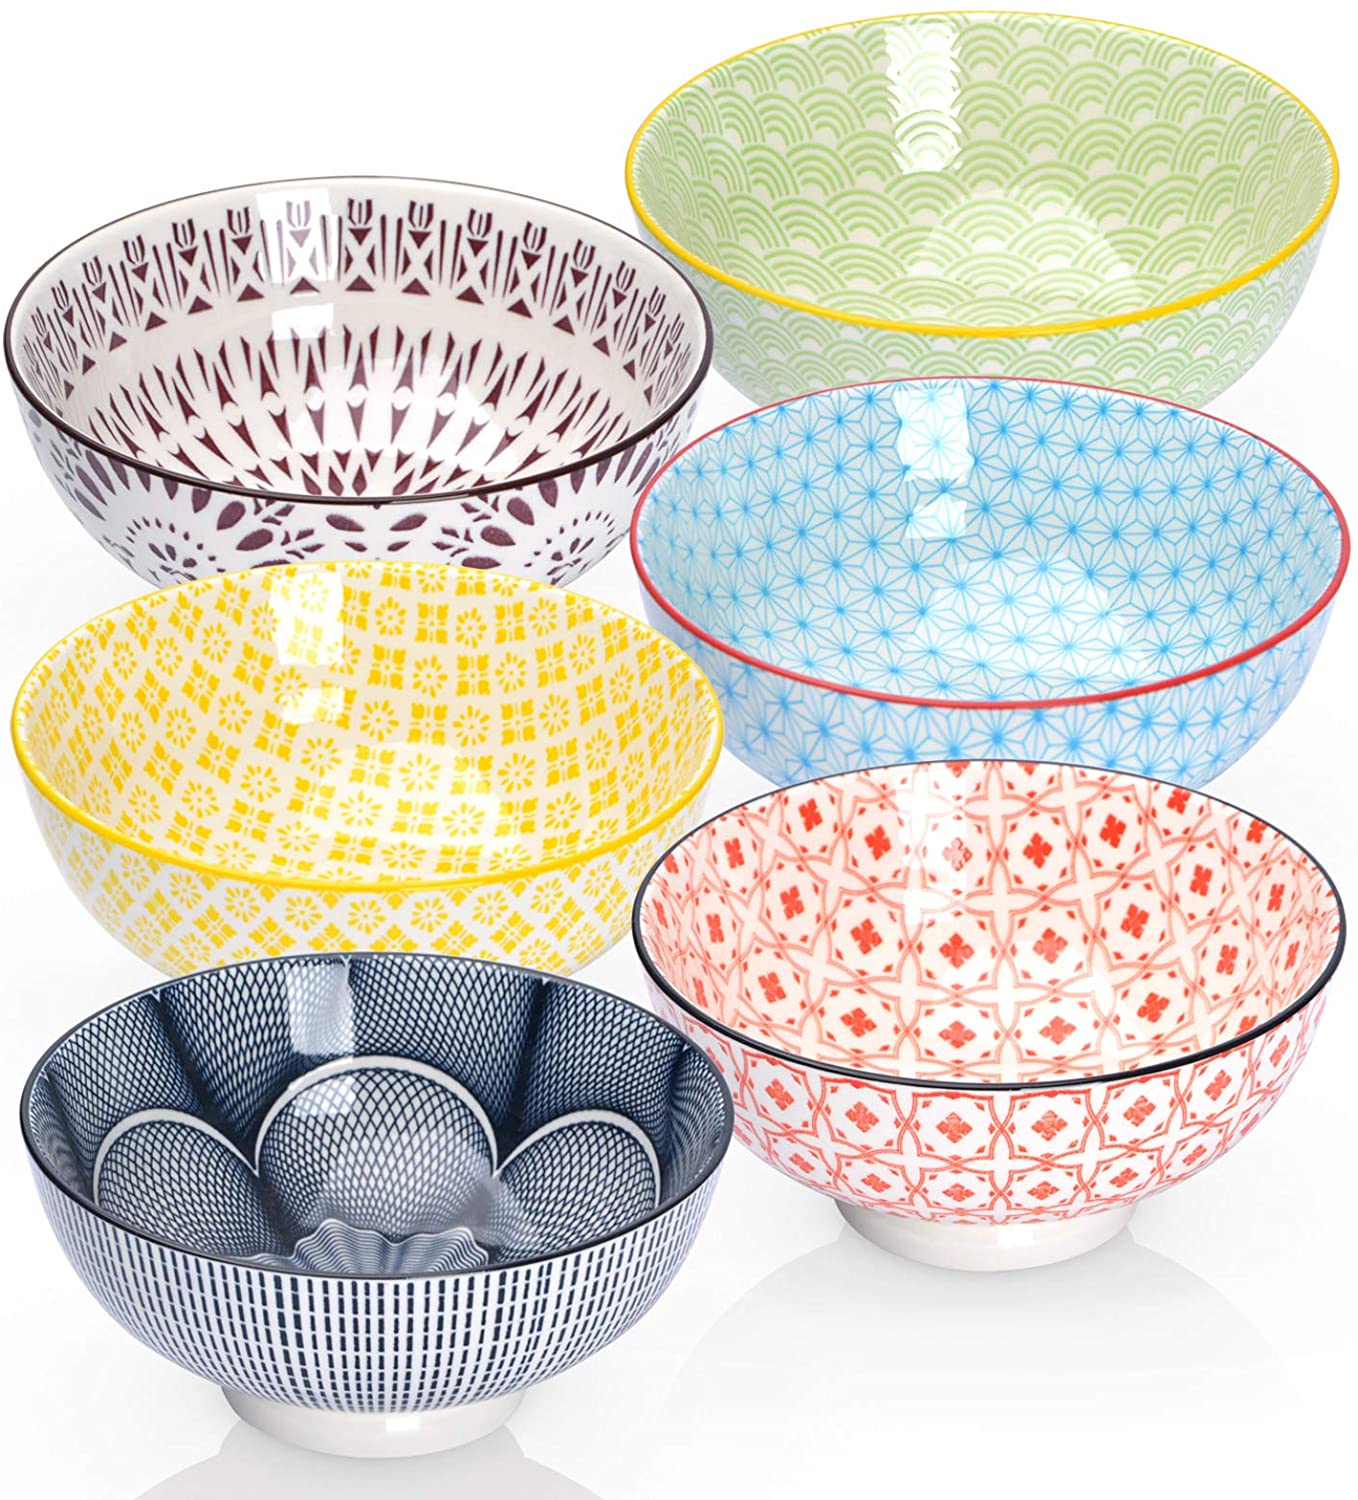 Lareina Ceramic Mixing Bowls for Kitchen, 3-Piece Large Colorful Serving Bowls, 3.13/1.68/1.18 qt Deep Microwaveable Nesting Bowl, Stackable and Funct